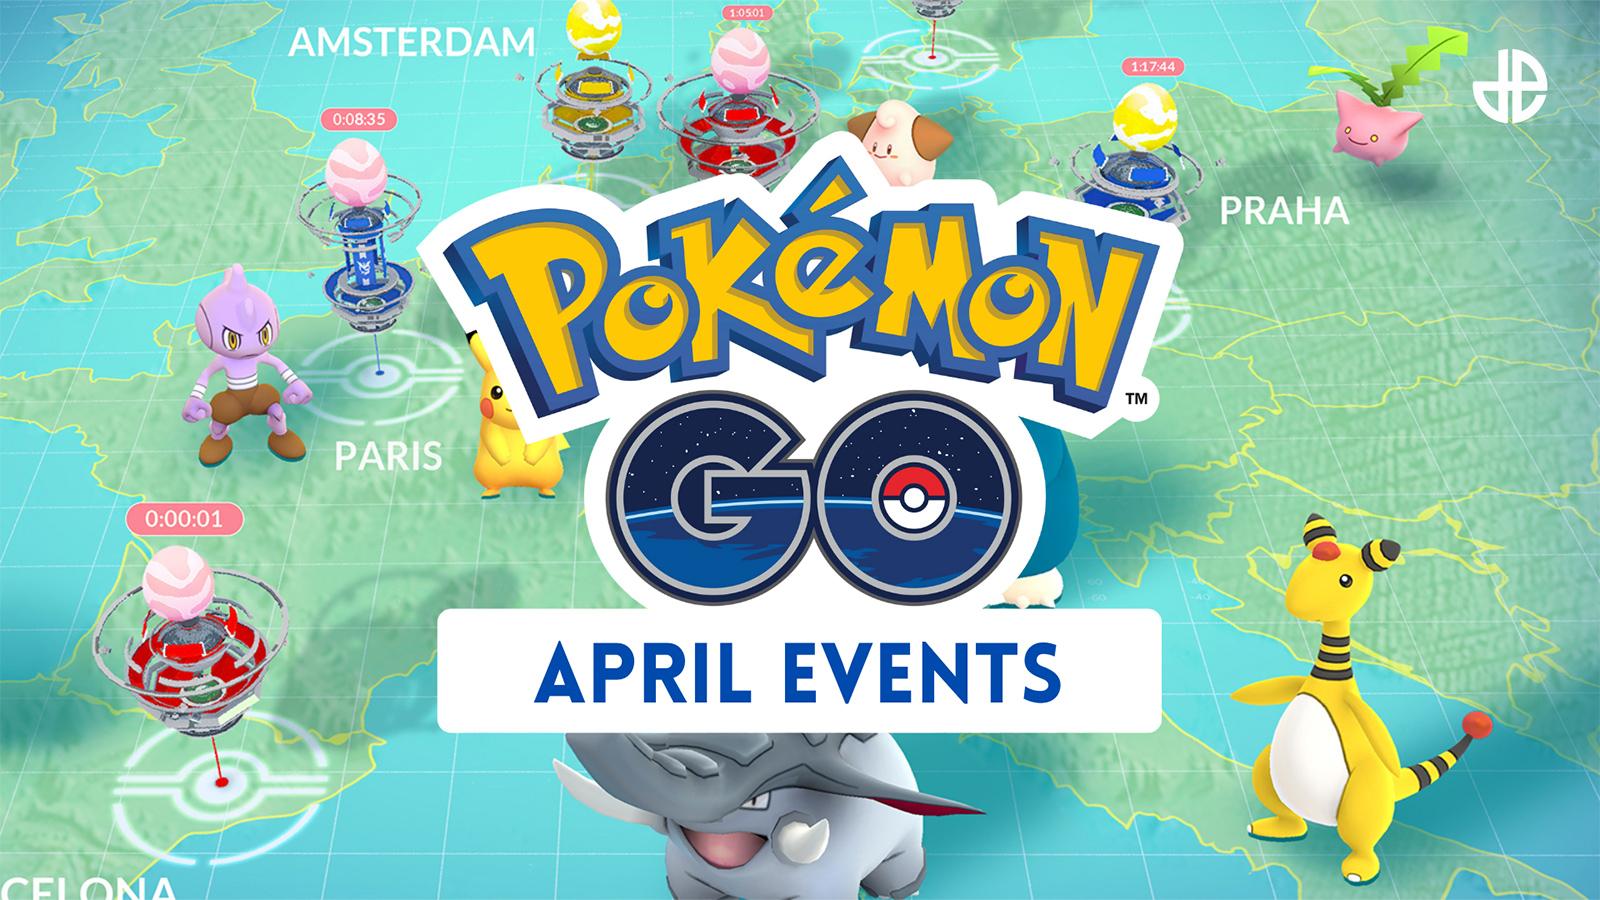 A poster for the Pokemon Go April events schedule